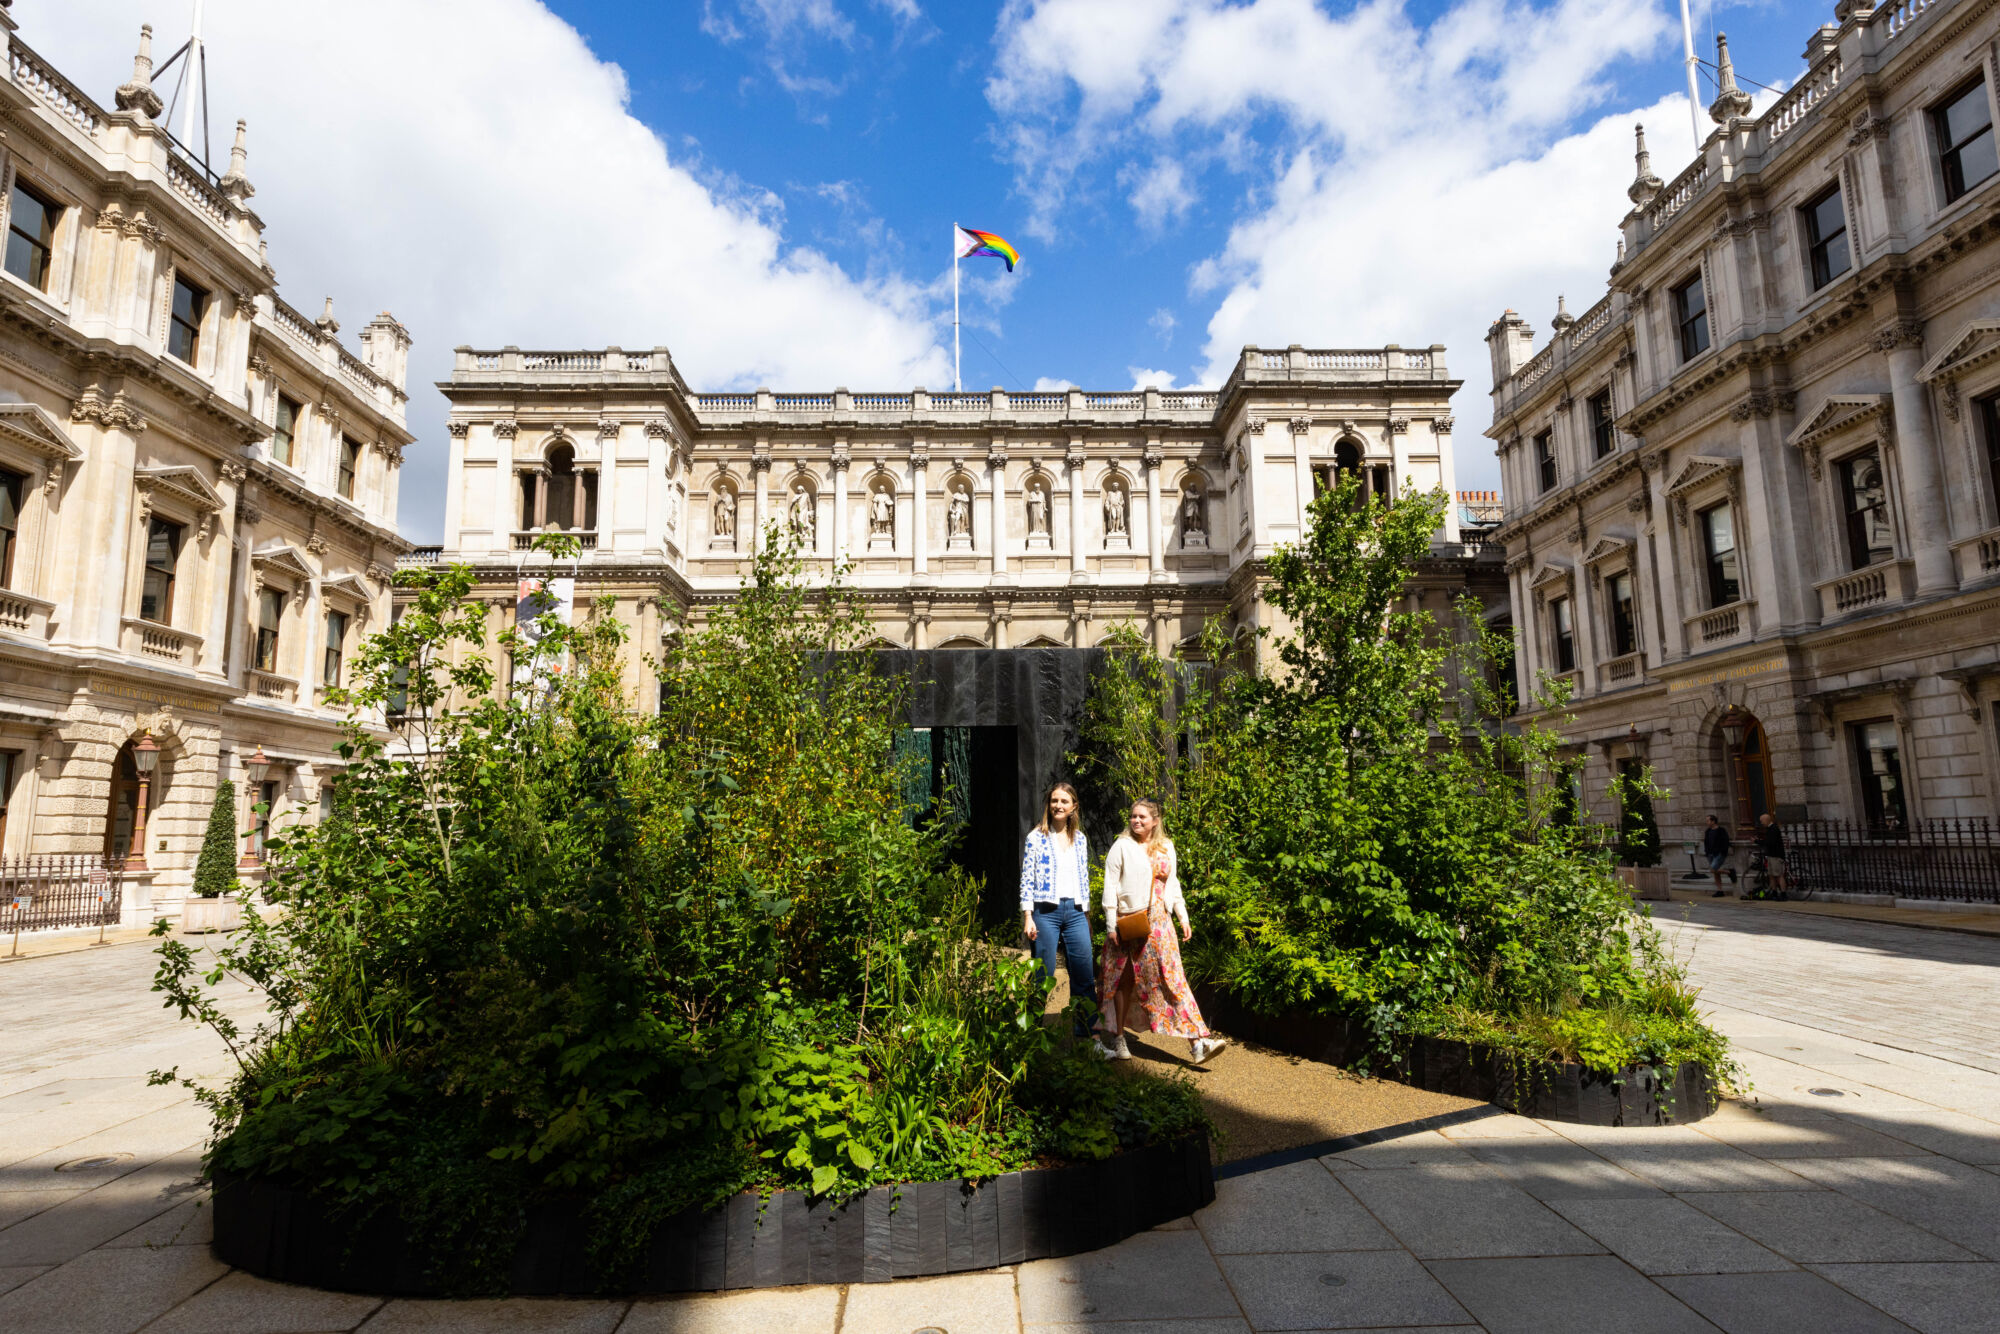 The Wick - Gallery view Summer Exhibition 2022
Photo: © David Parry/ Royal Academy of Arts